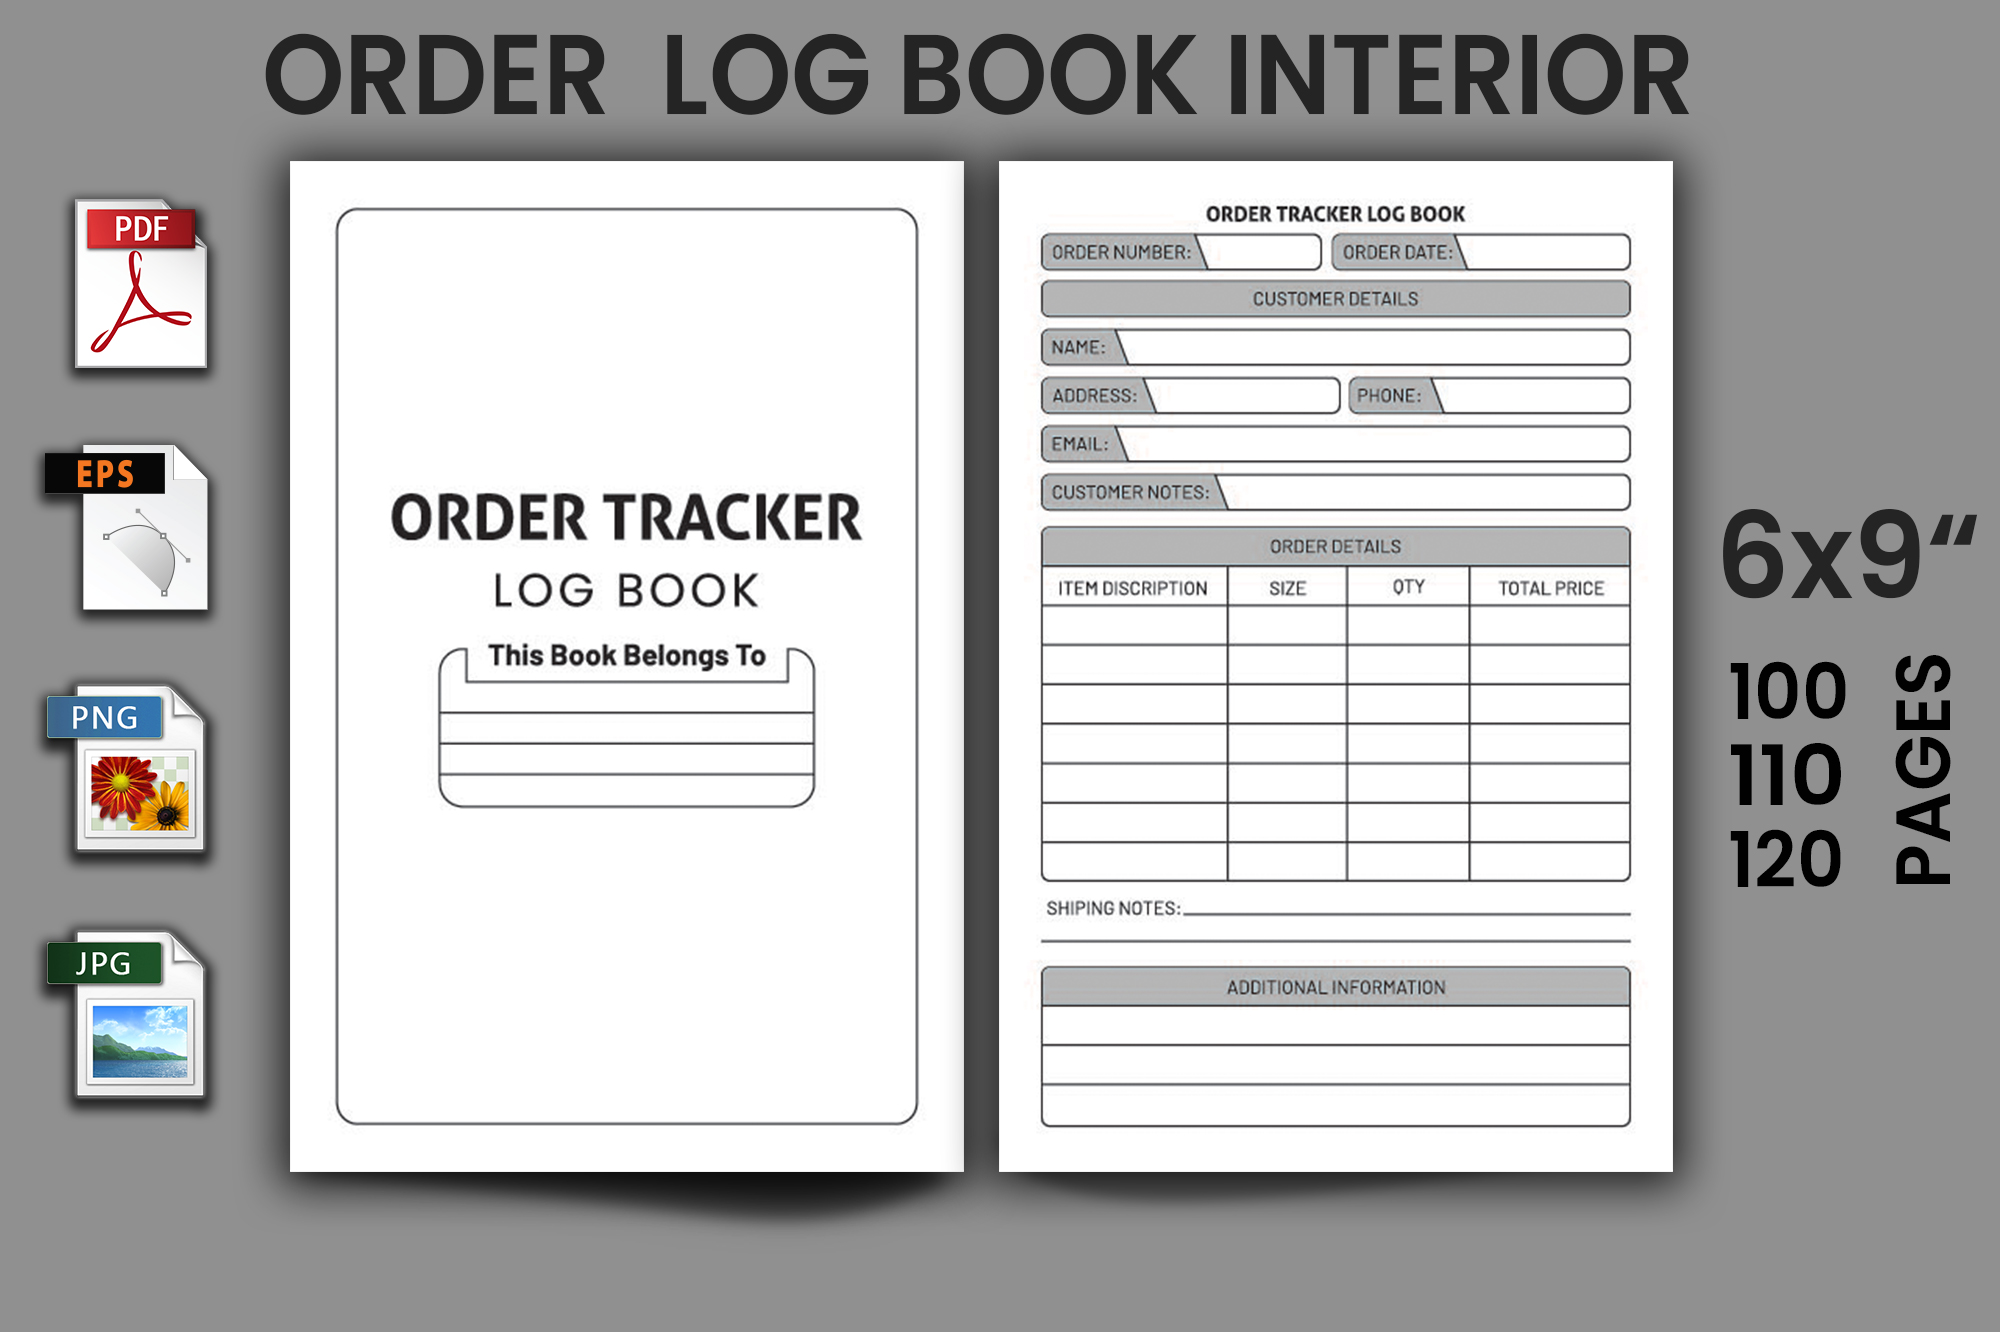 Order book with a picture of the order book.